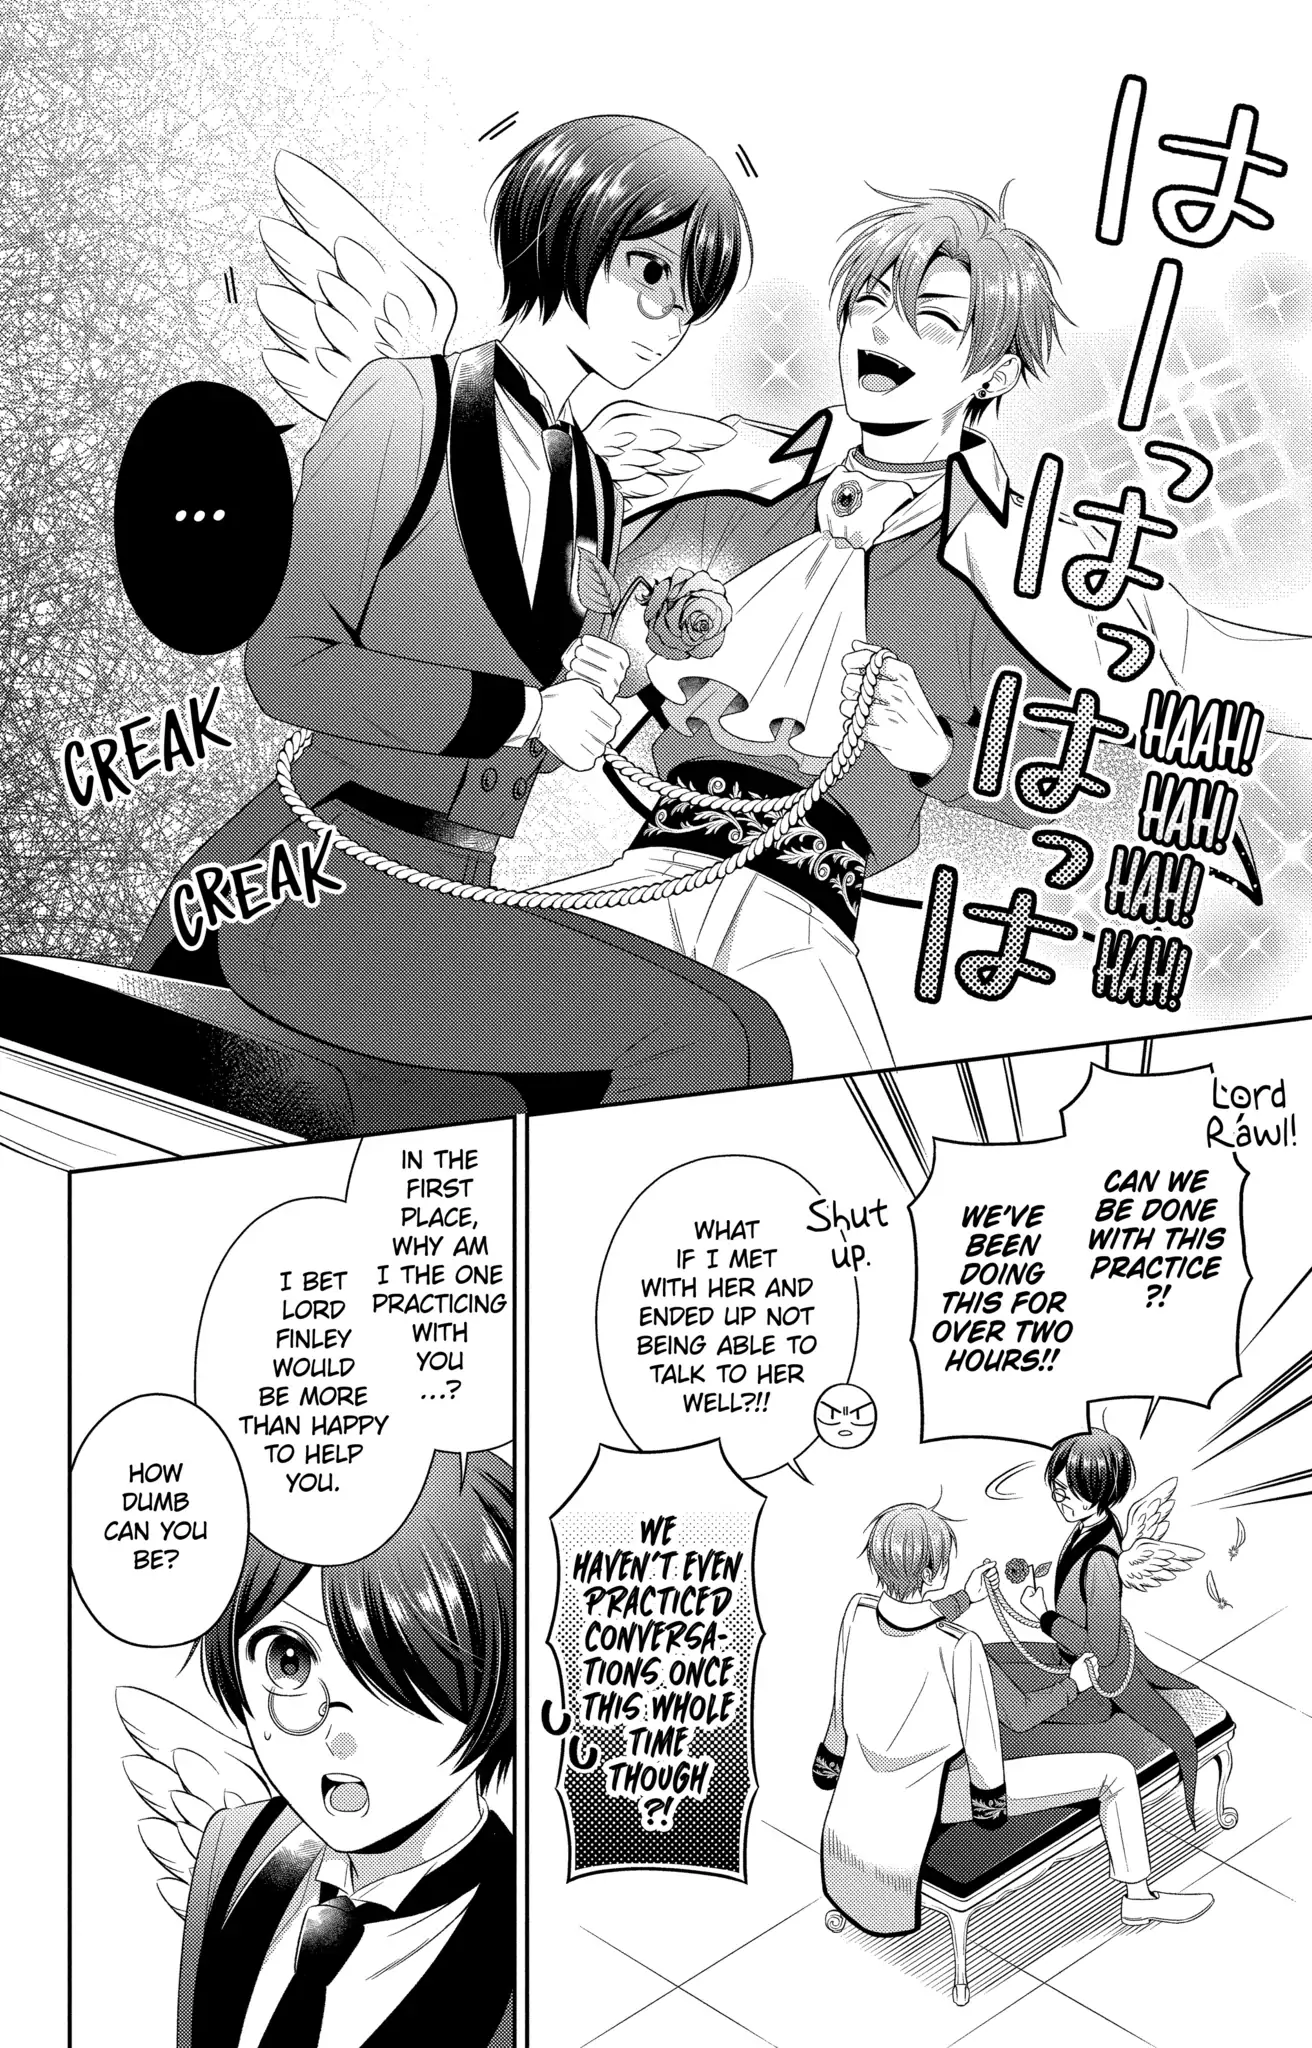 Disguised As A Butler The Former Princess Evades The Prince’S Love! - Page 3